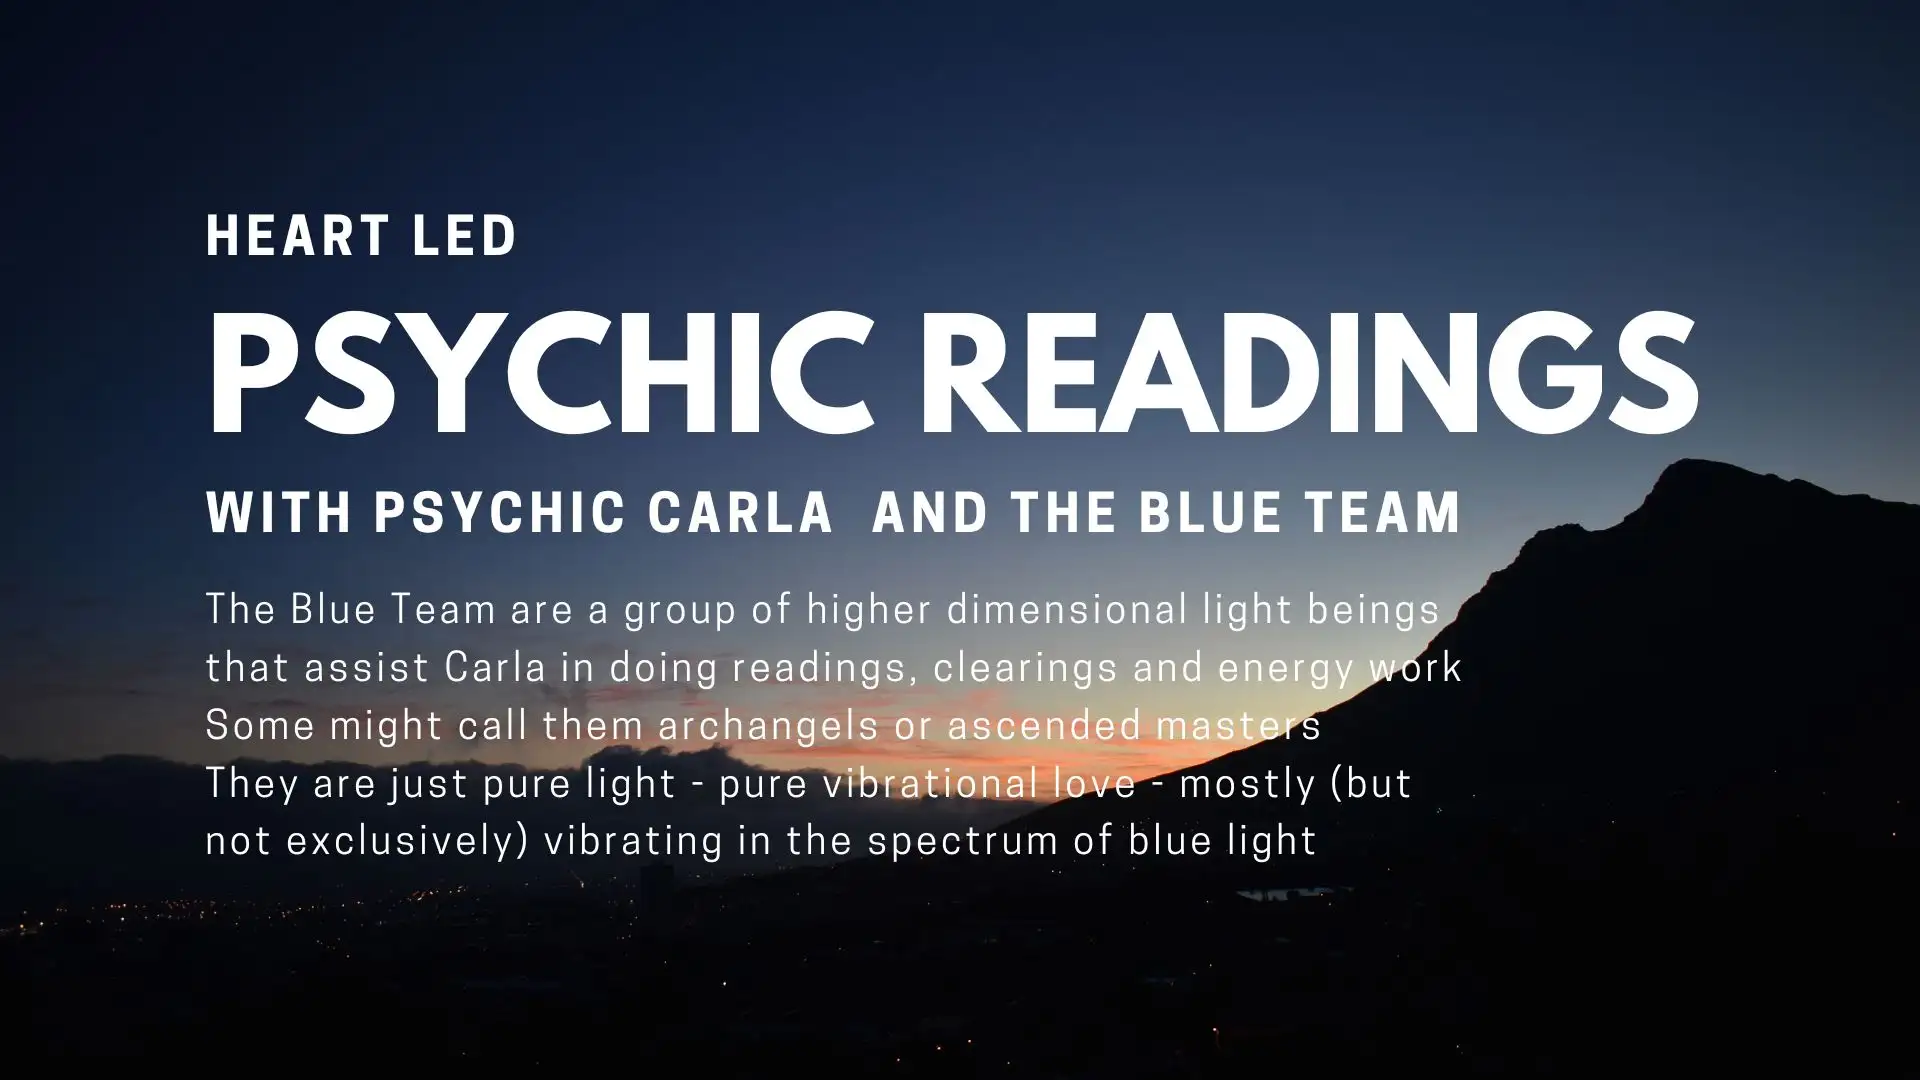 Heart led Psychic Readings with Psychic Carla LunAscention and the Blue Team The Blue Team are a group of higher dimensional light beings Anyone can call on these beings for assistance Some might call them archangels or ascended masters They are just pure light - pure vibrational love - mostly (but not exclusively) vibrating in the spectrum of blue light